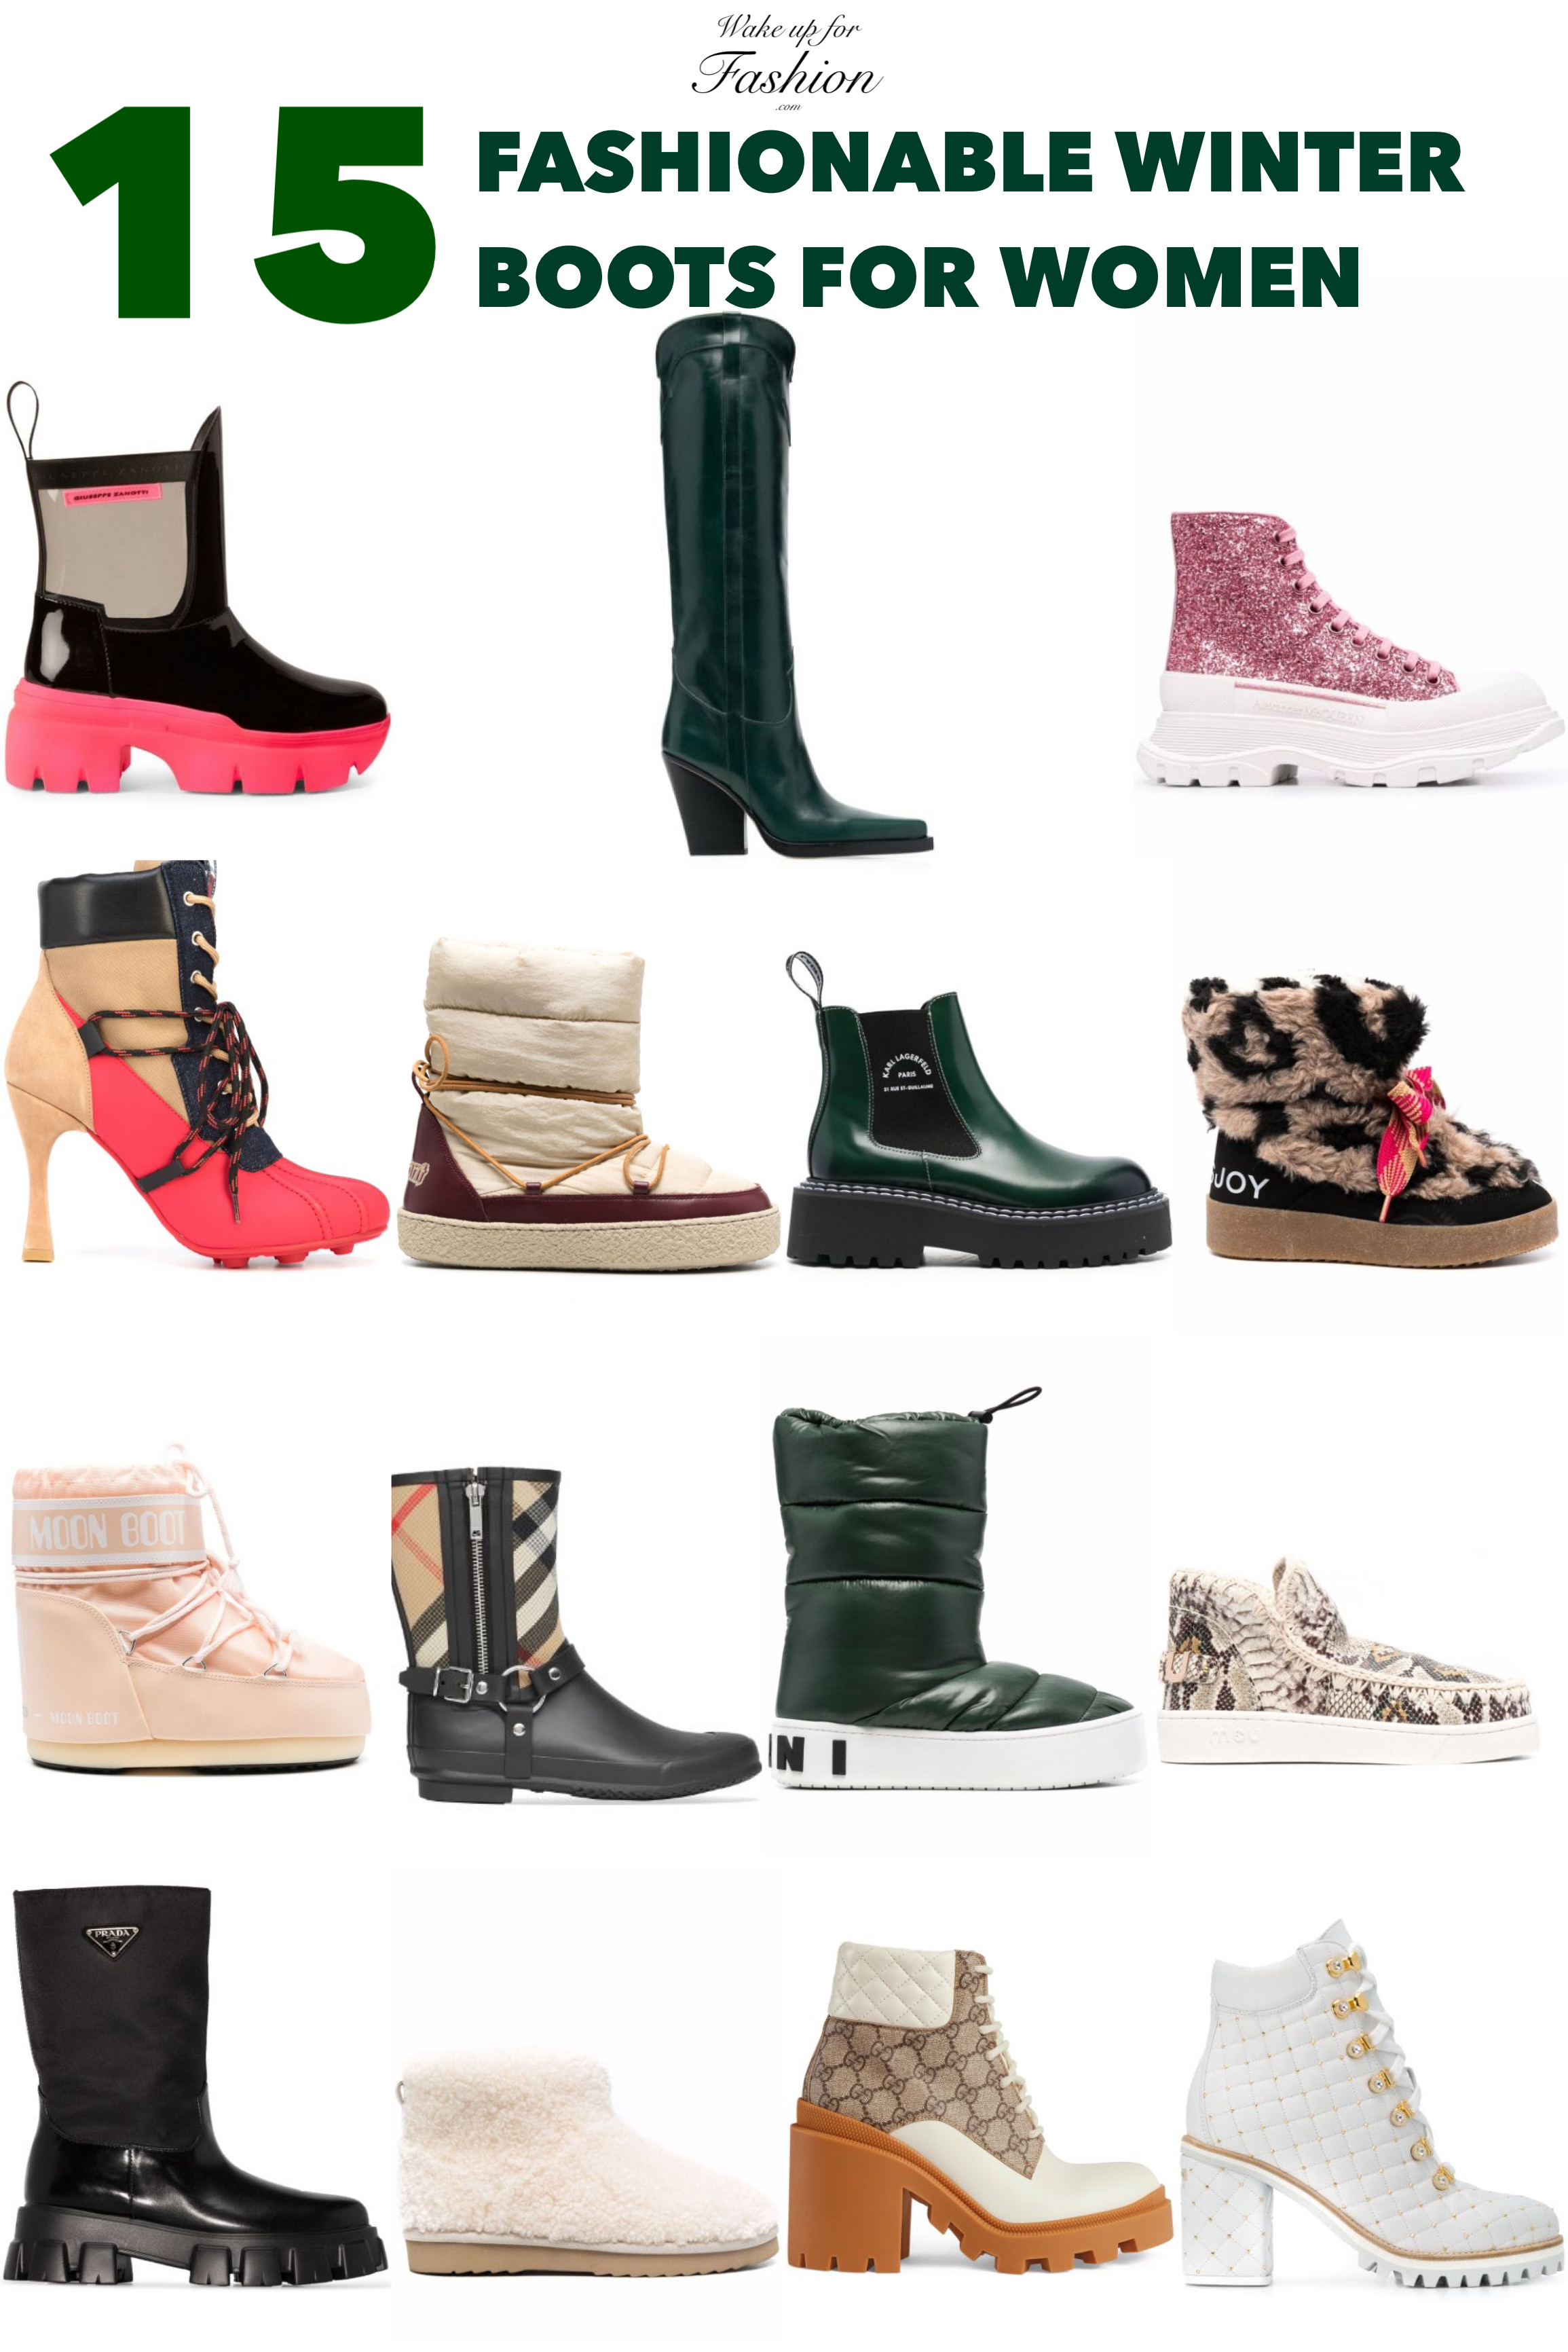 Collection of stylish women’s winter boots